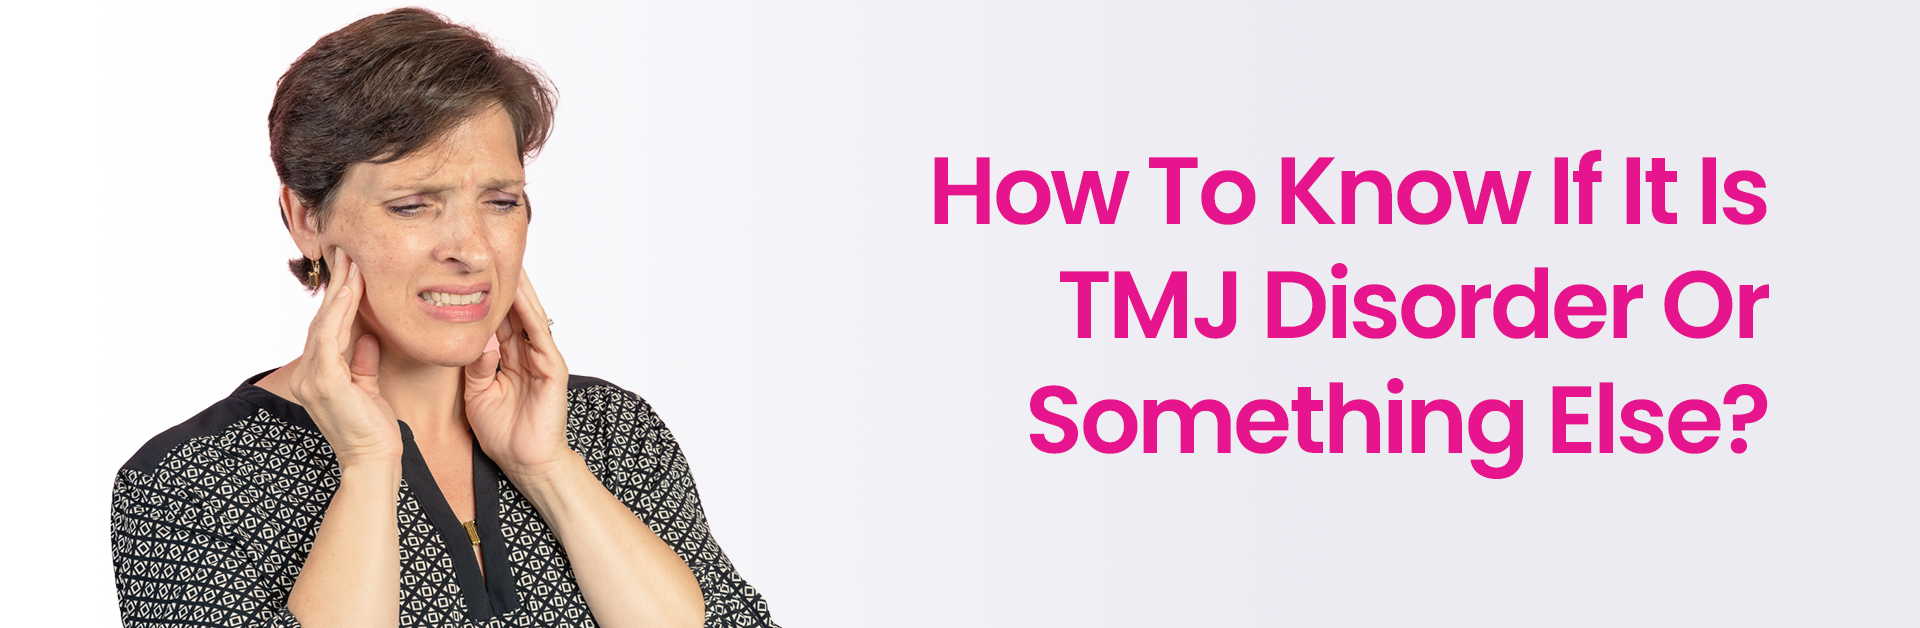 HOW TO KNOW IF IT IS TMJ DISORDER OR SOMETHING ELSE?